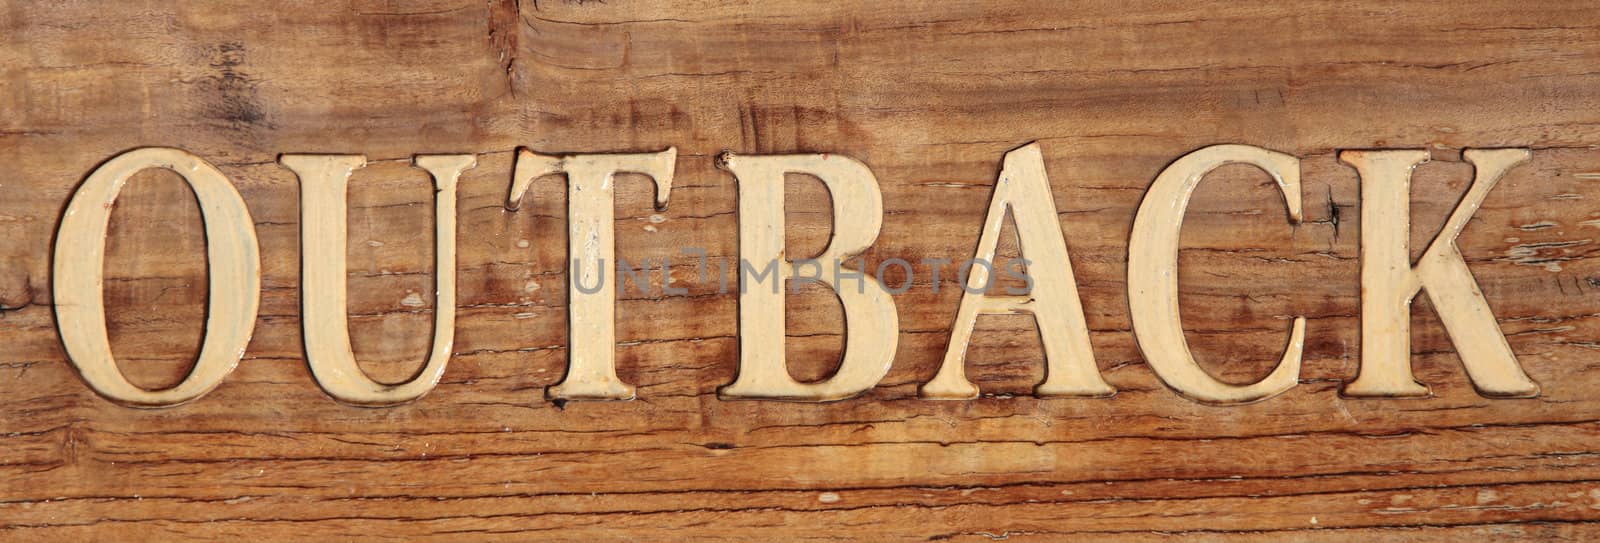 Outback as a term on rustic wooden board.